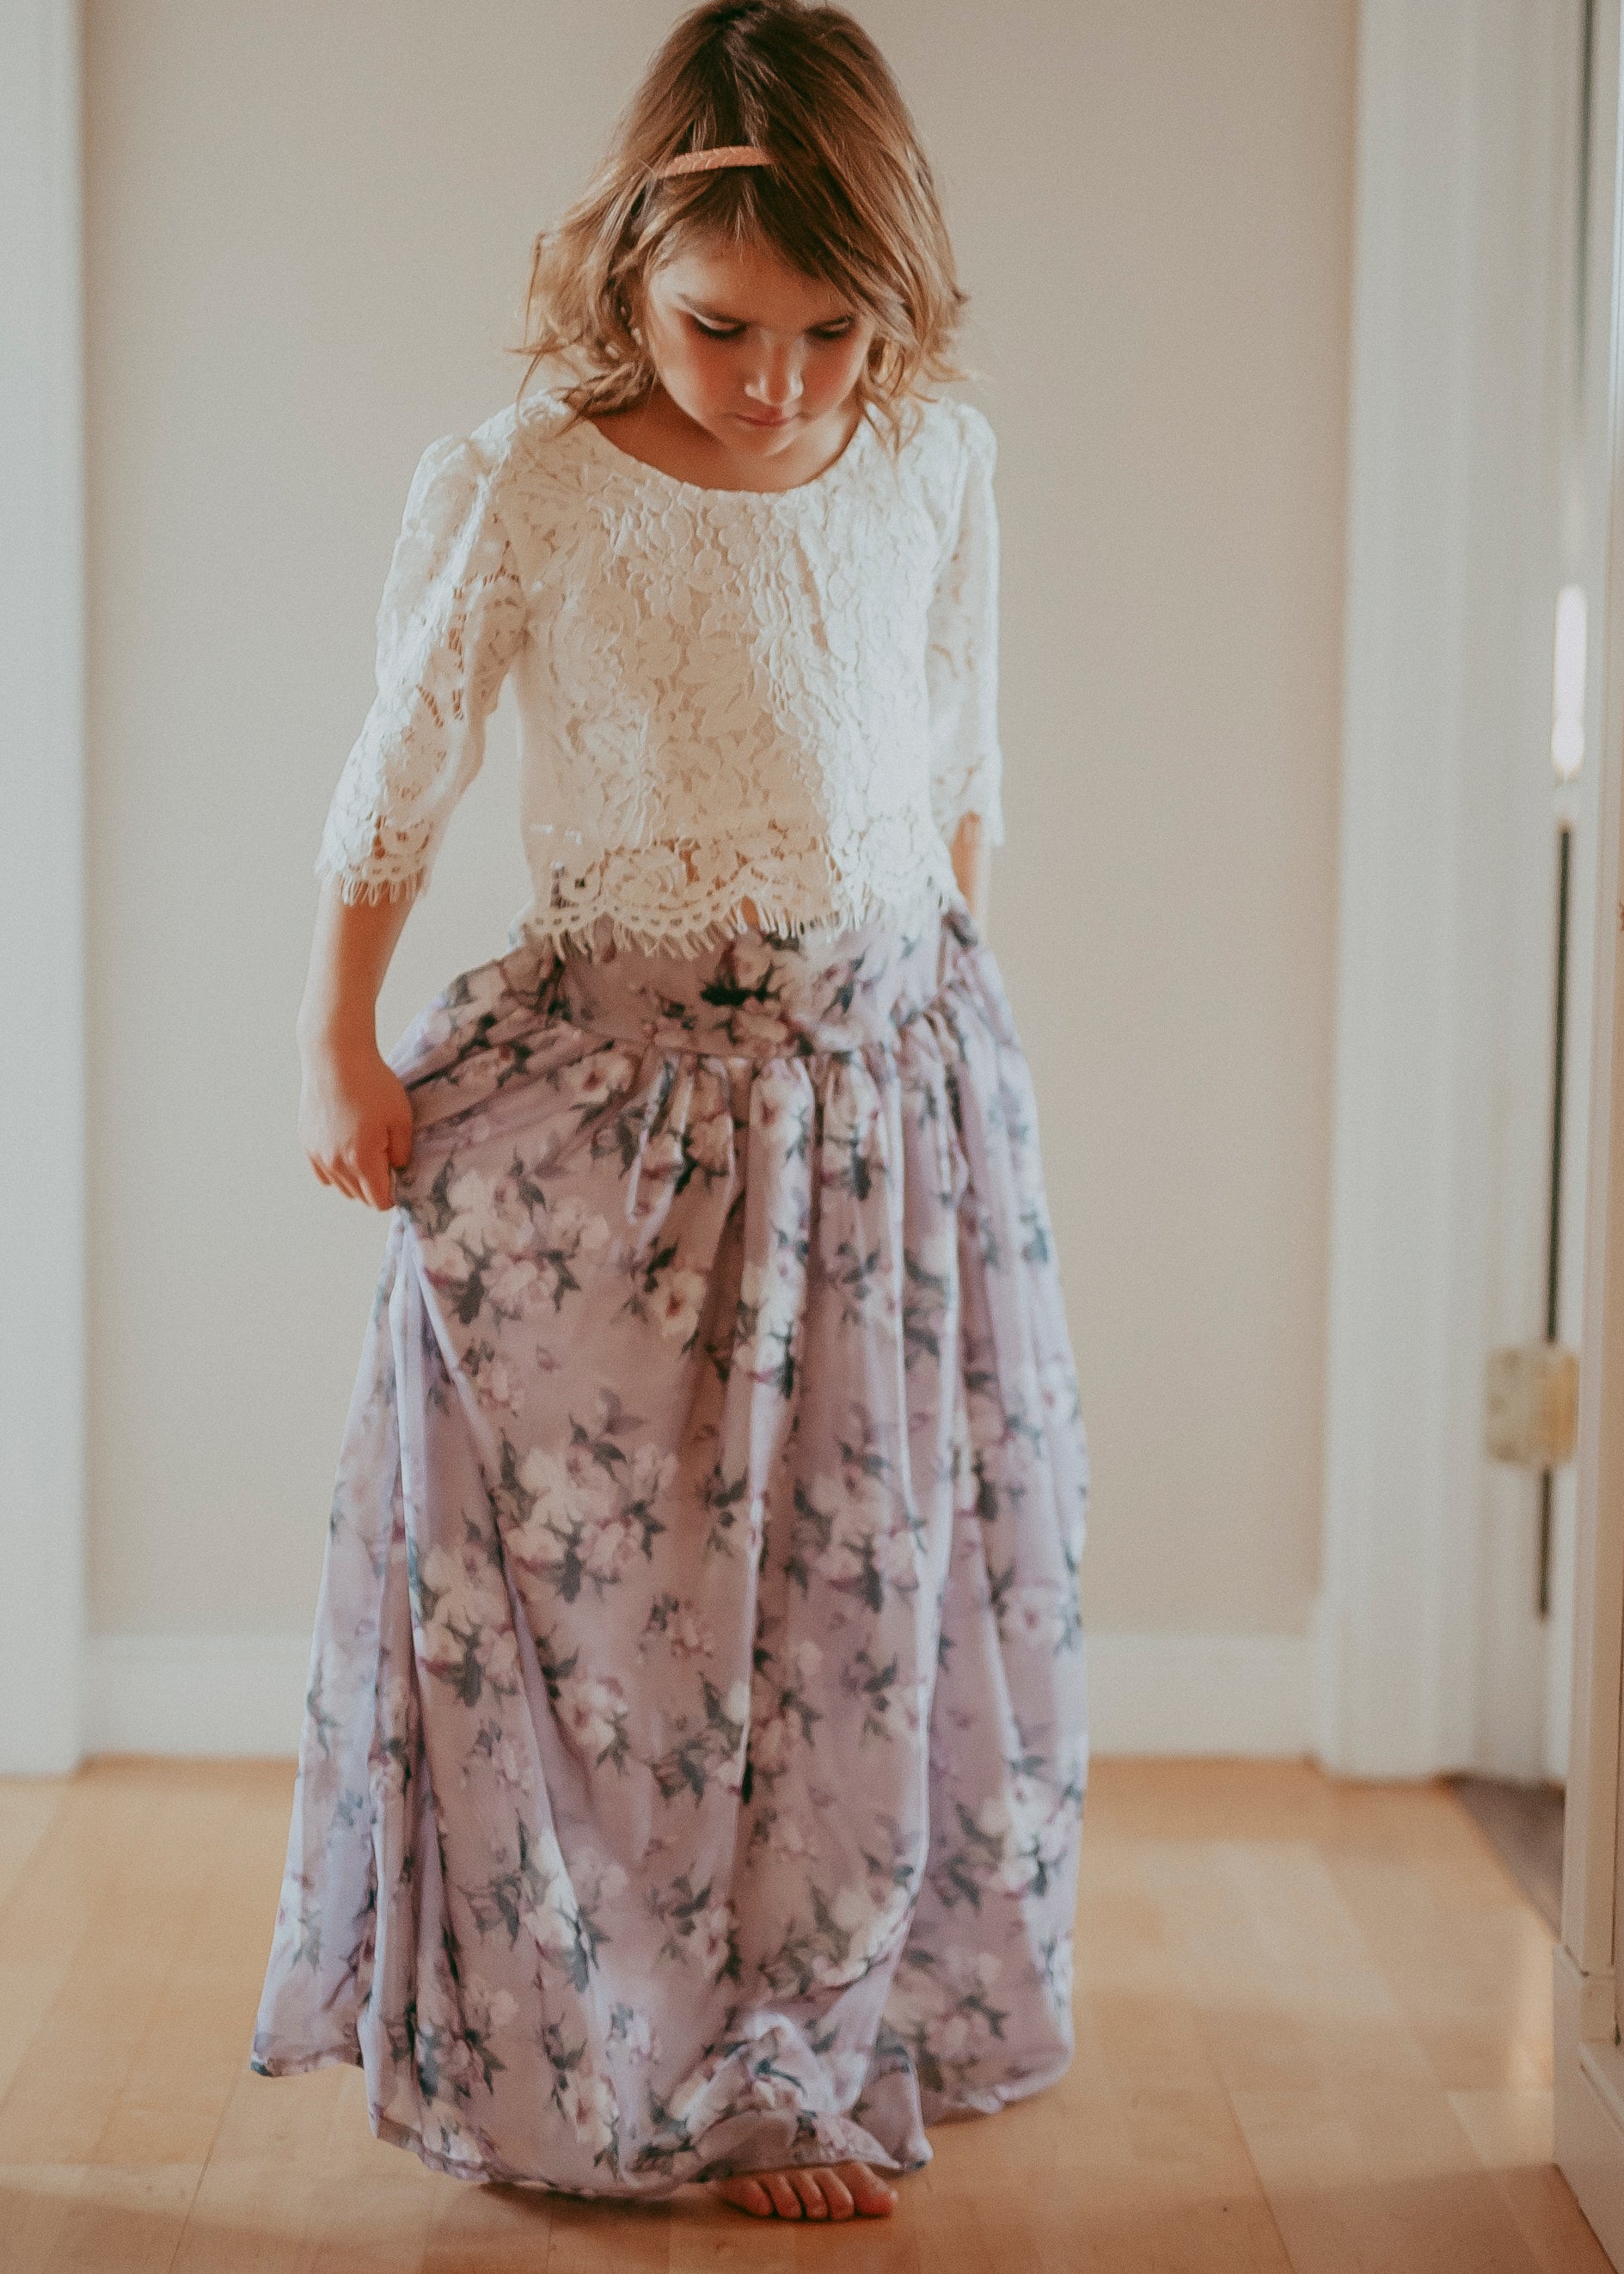 Floral Lace Maxi Skirt - Ready-to-Wear 1ABCPW